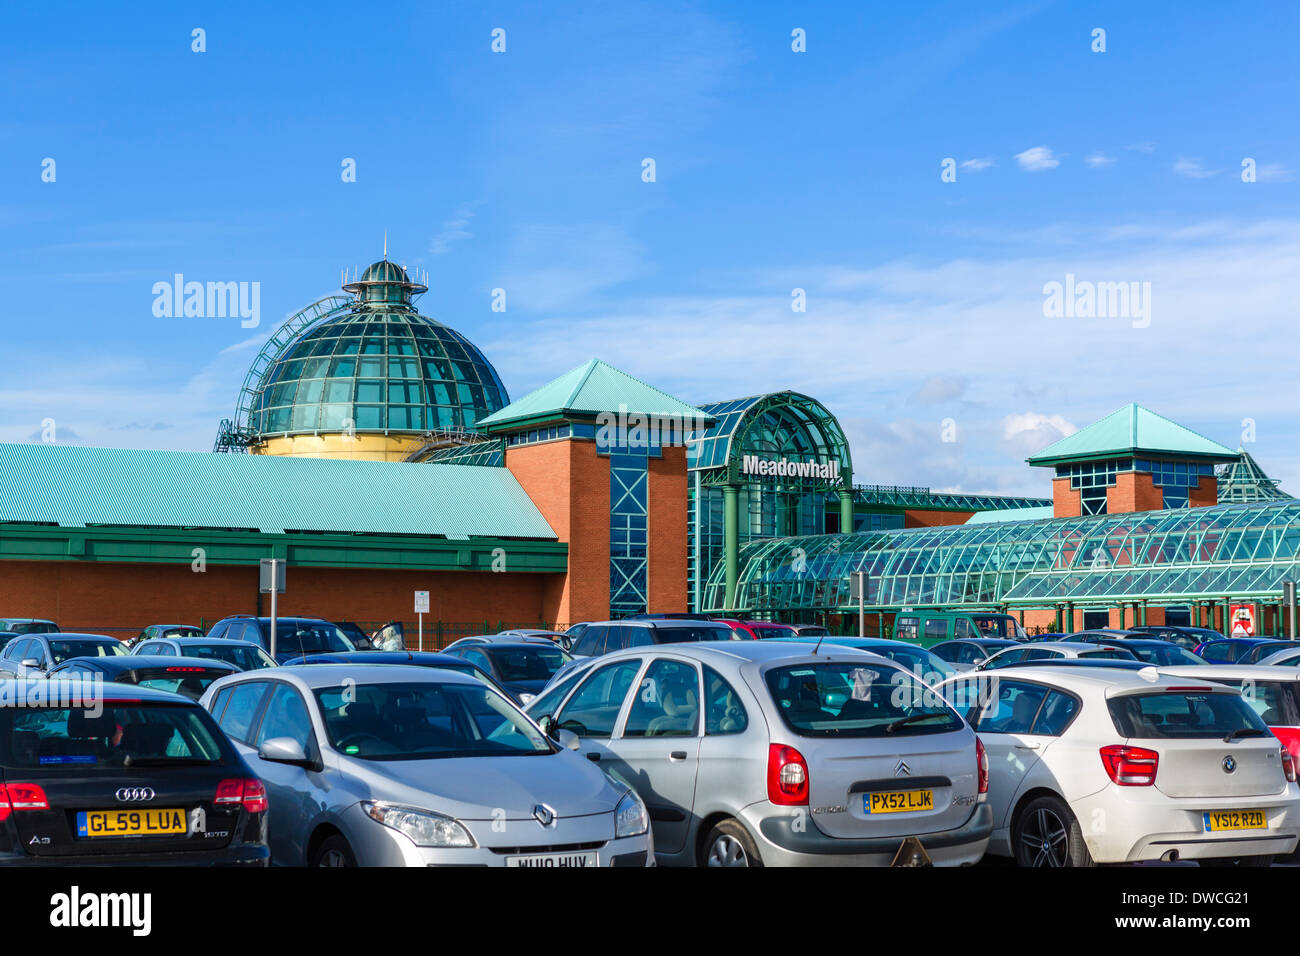 Meadowhall Shopping Centre, Sheffield South Yorkshire, Inghilterra, Regno Unito Foto Stock